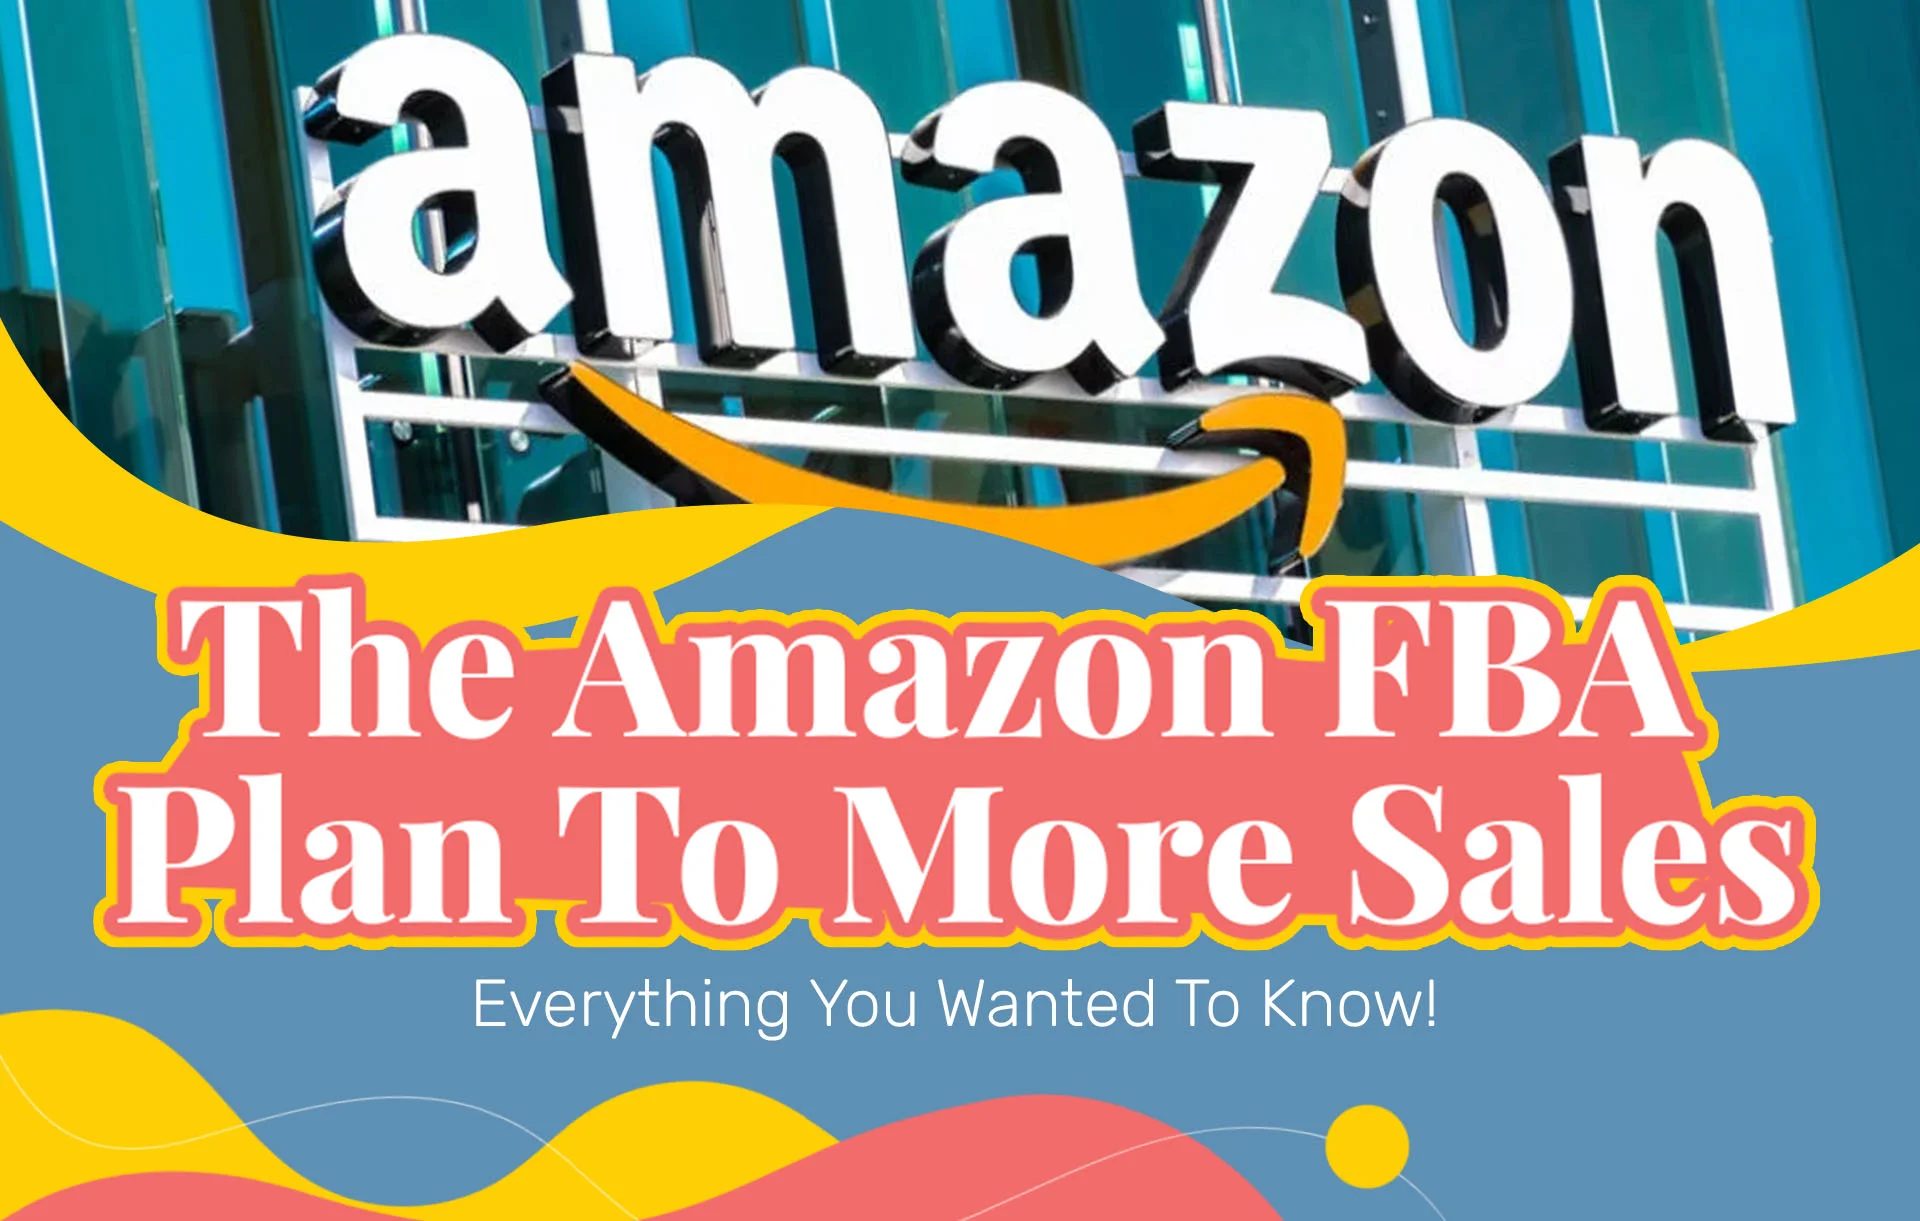 The Amazon FBA Business Plan to More Sales